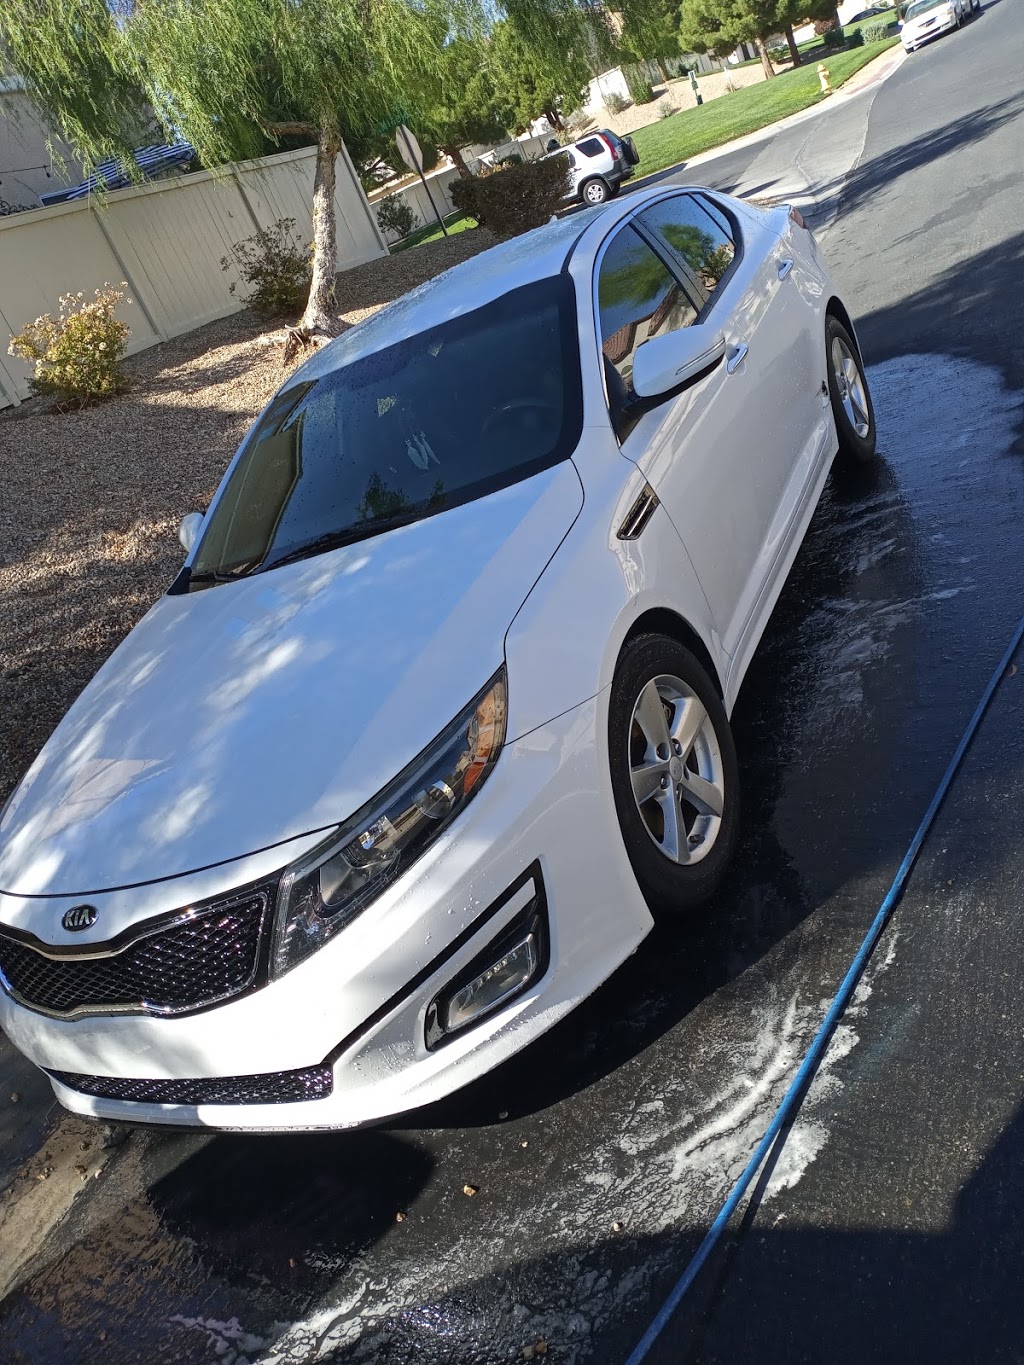 sewell mobile car wash | 2402 Roaring Lion Ave, North Las Vegas, NV 89031 | Phone: (702) 665-3197